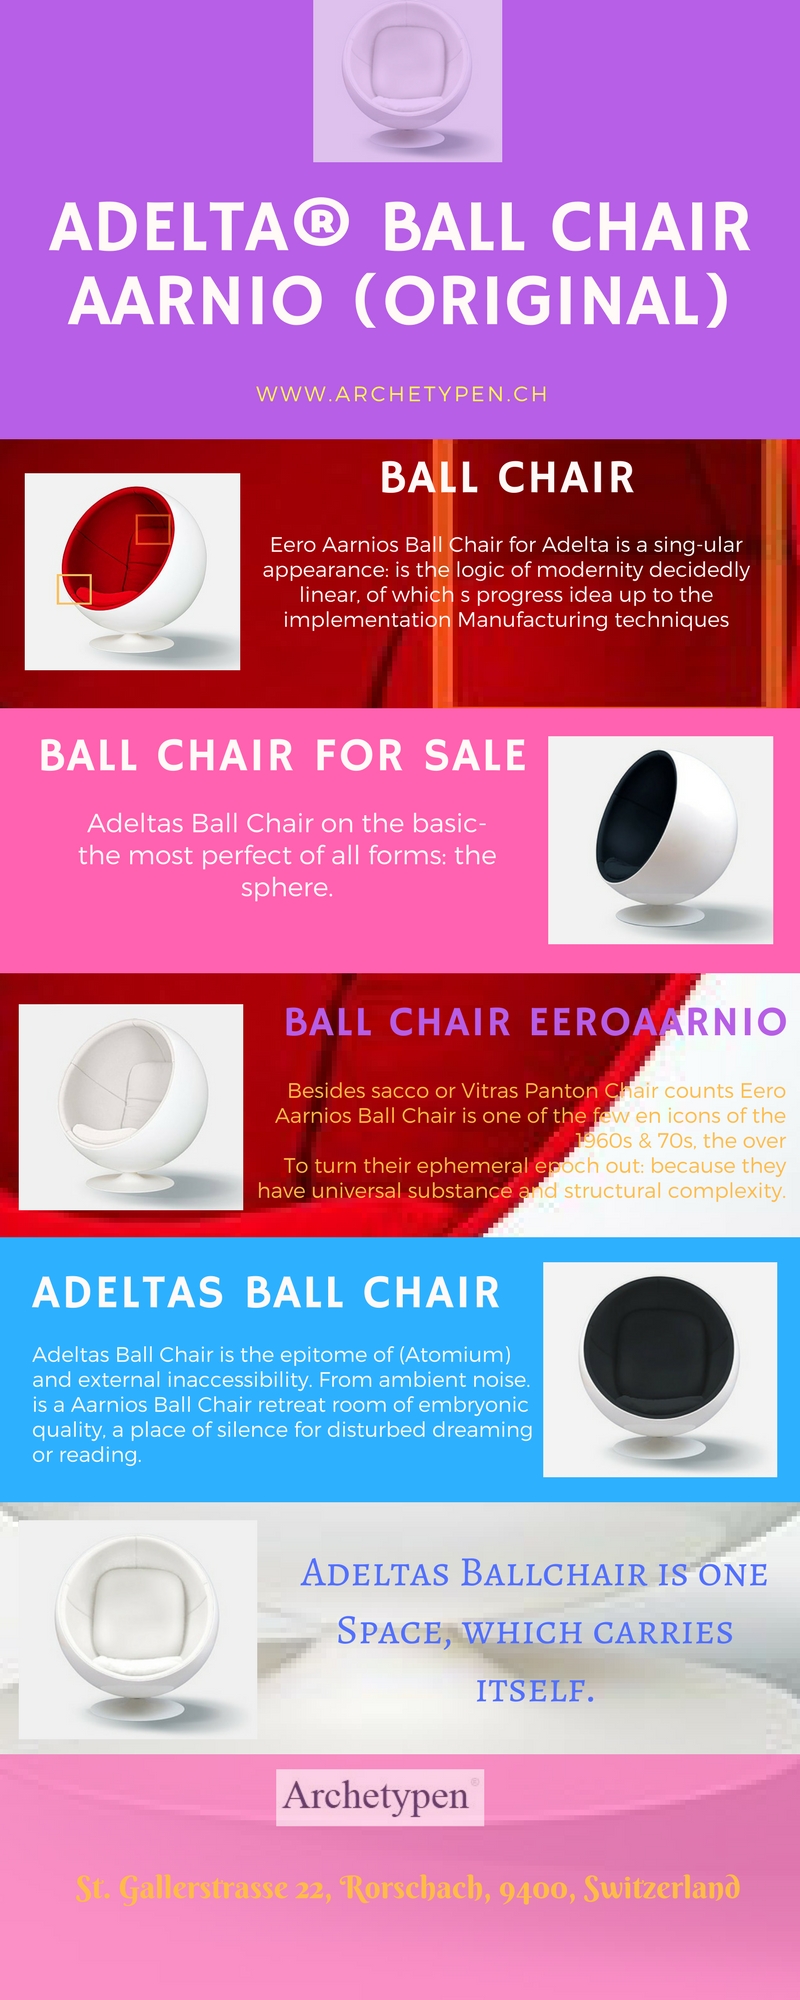 Ball chair eero aarnio.jpg The original Aarnios Ball chair is a retreat for any room. It creates a perfect place of silence for undisturbed dreaming and distraction free reading. Add this beautiful furniture to your room today. Visit www.archetypen.ch for additional details. by archetypen